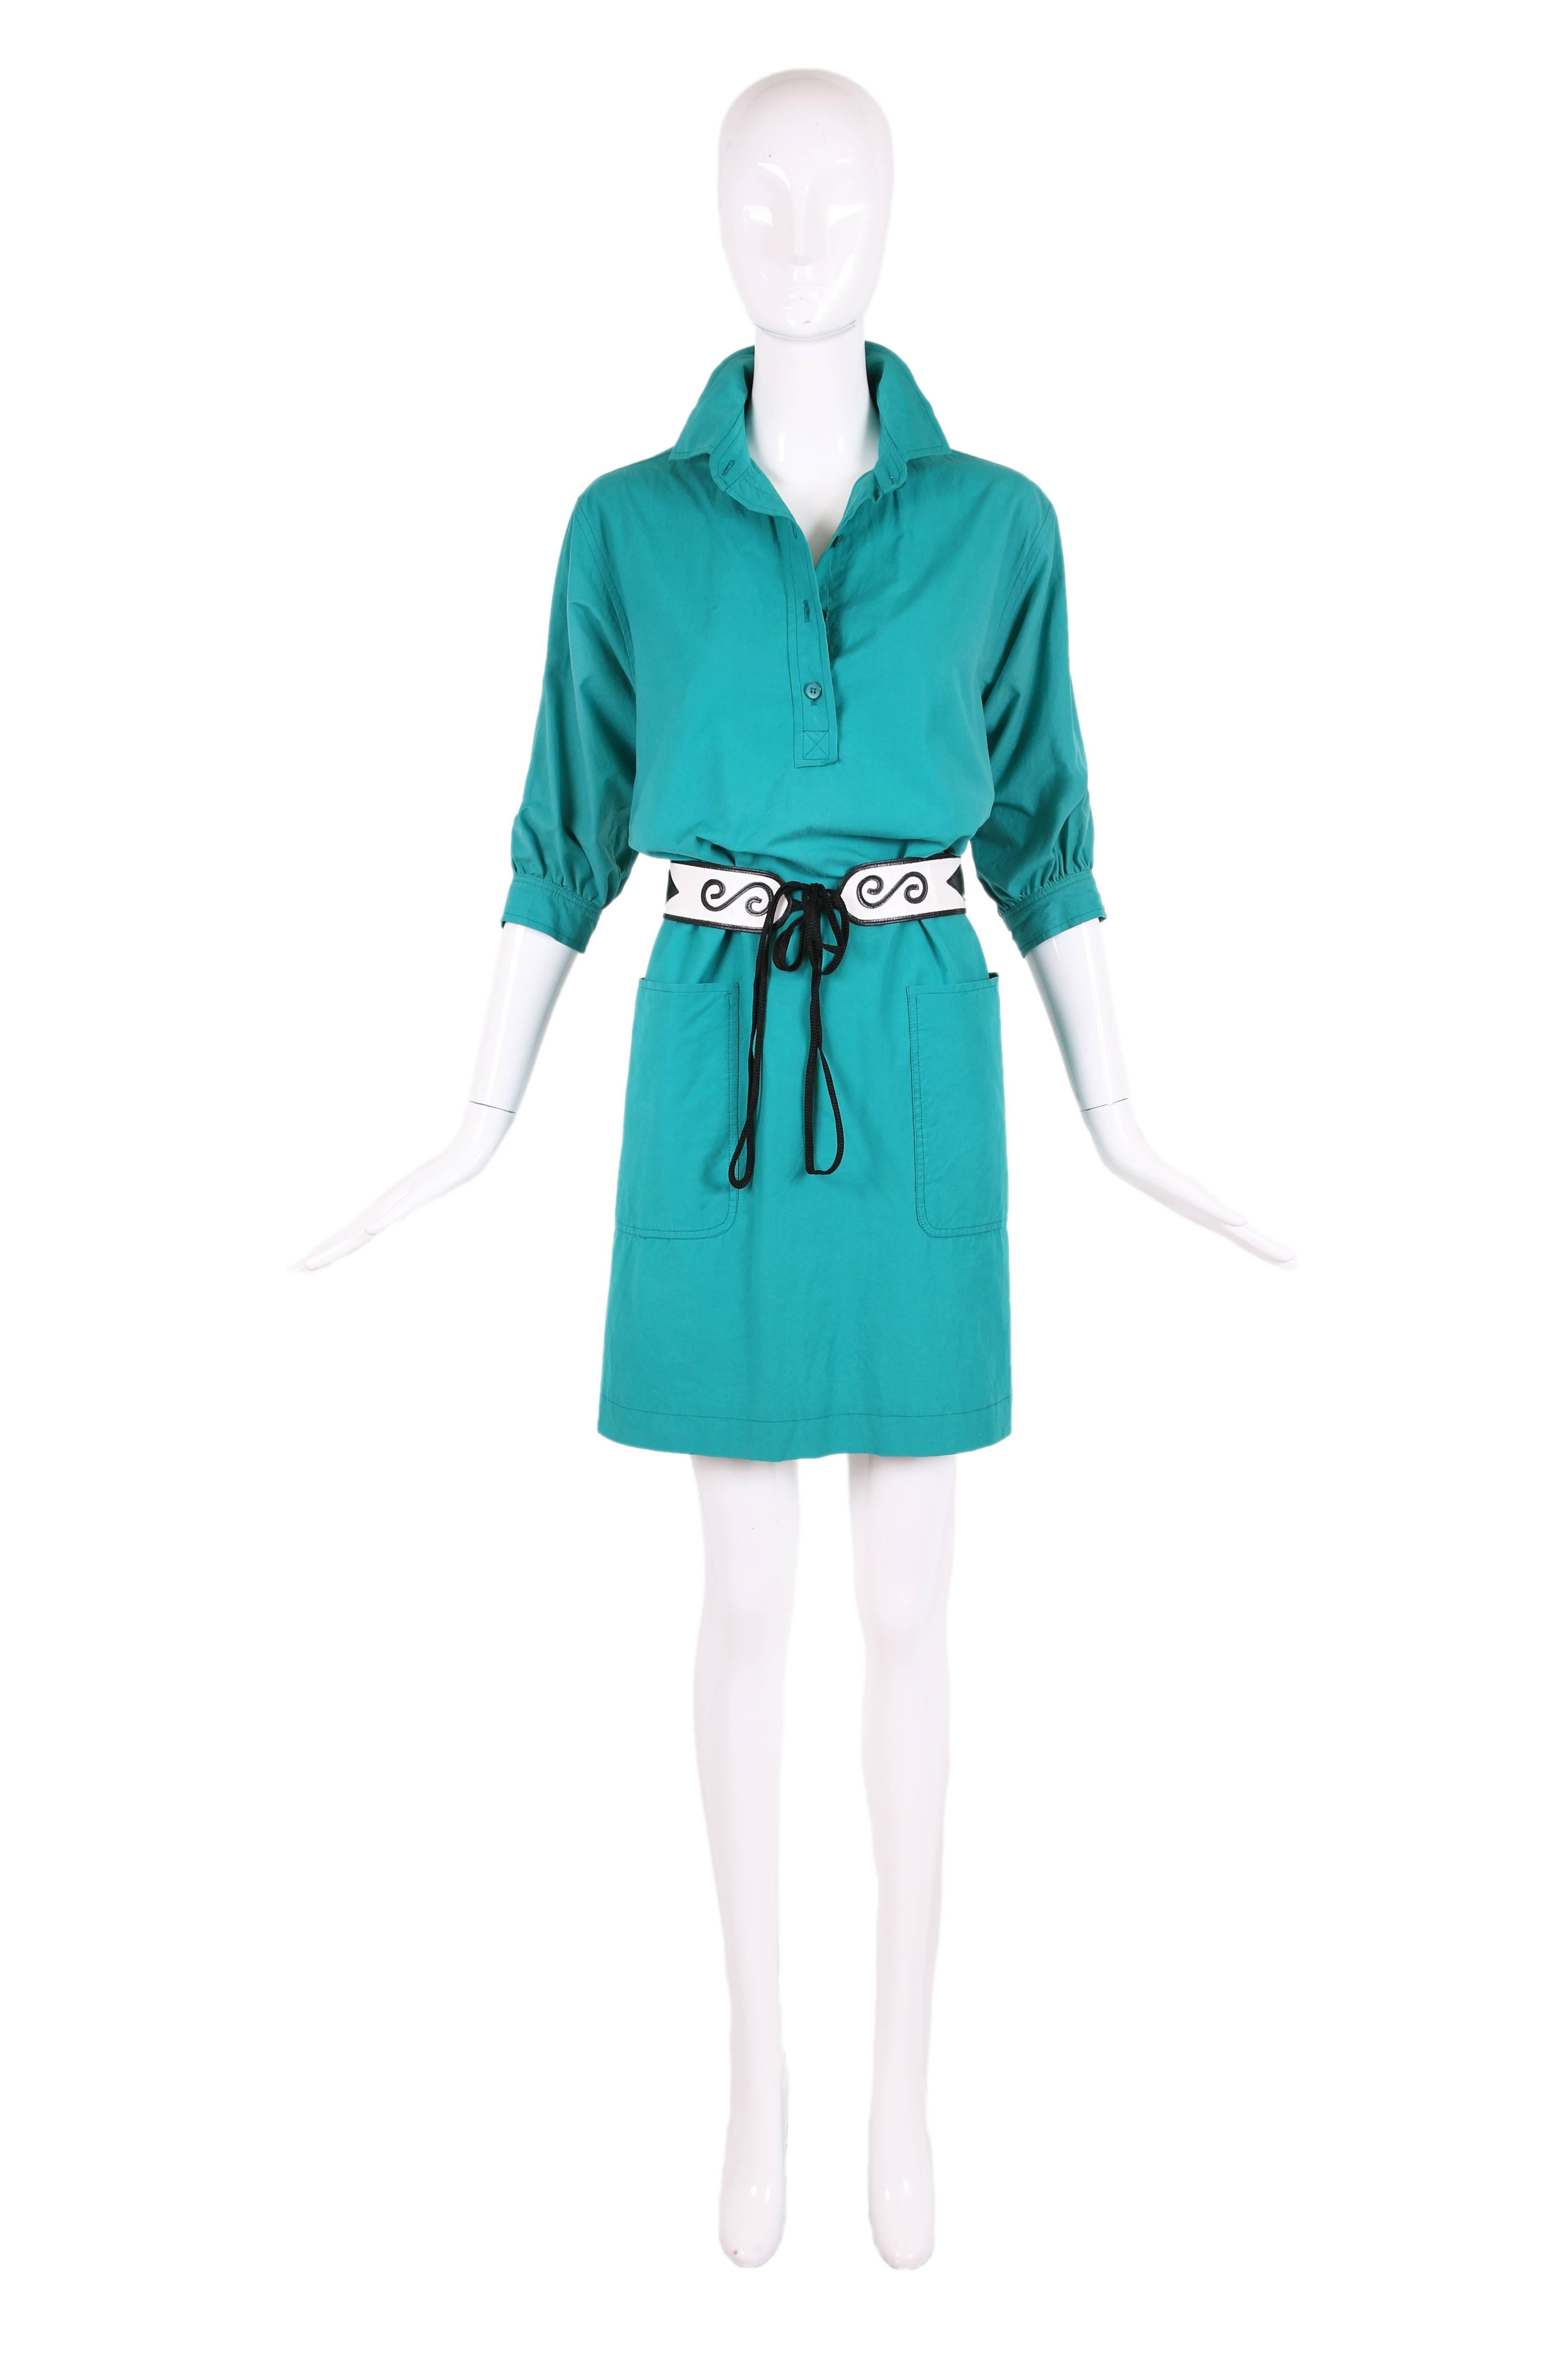 1970's Yves Saint Laurent teal green smock dress featuring frontal pockets, a subtle slit at either side and 3/4 sleeves. Belt is not included. Size tag 36. In excellent condition.
MEASUREMENTS:
Shoulder - 16.5"
Sleeves - 15"
Bust -